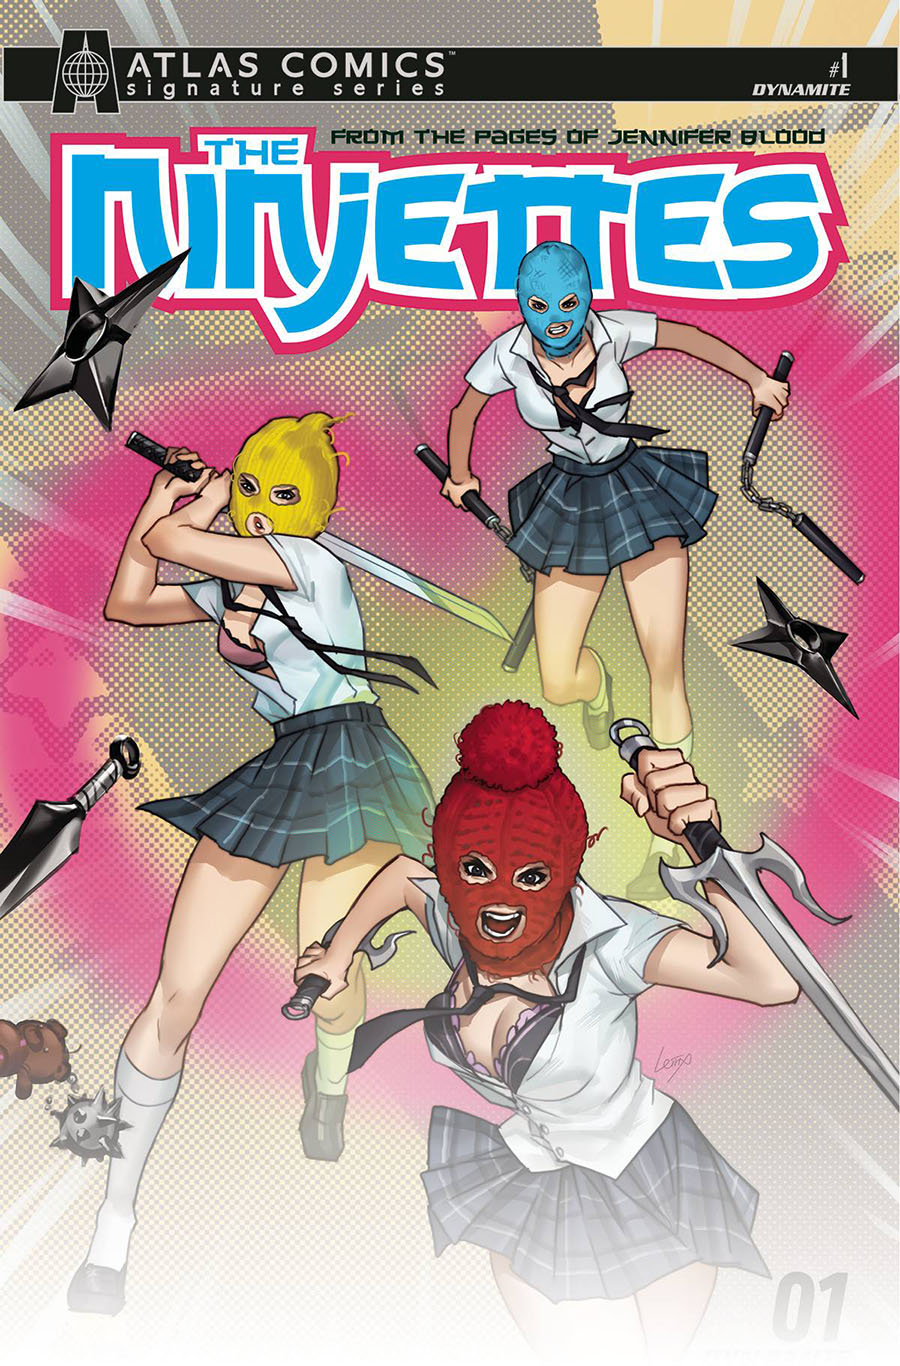 Ninjettes #1 Cover M Atlas Comics Signature Series Signed By Fred Van Lente